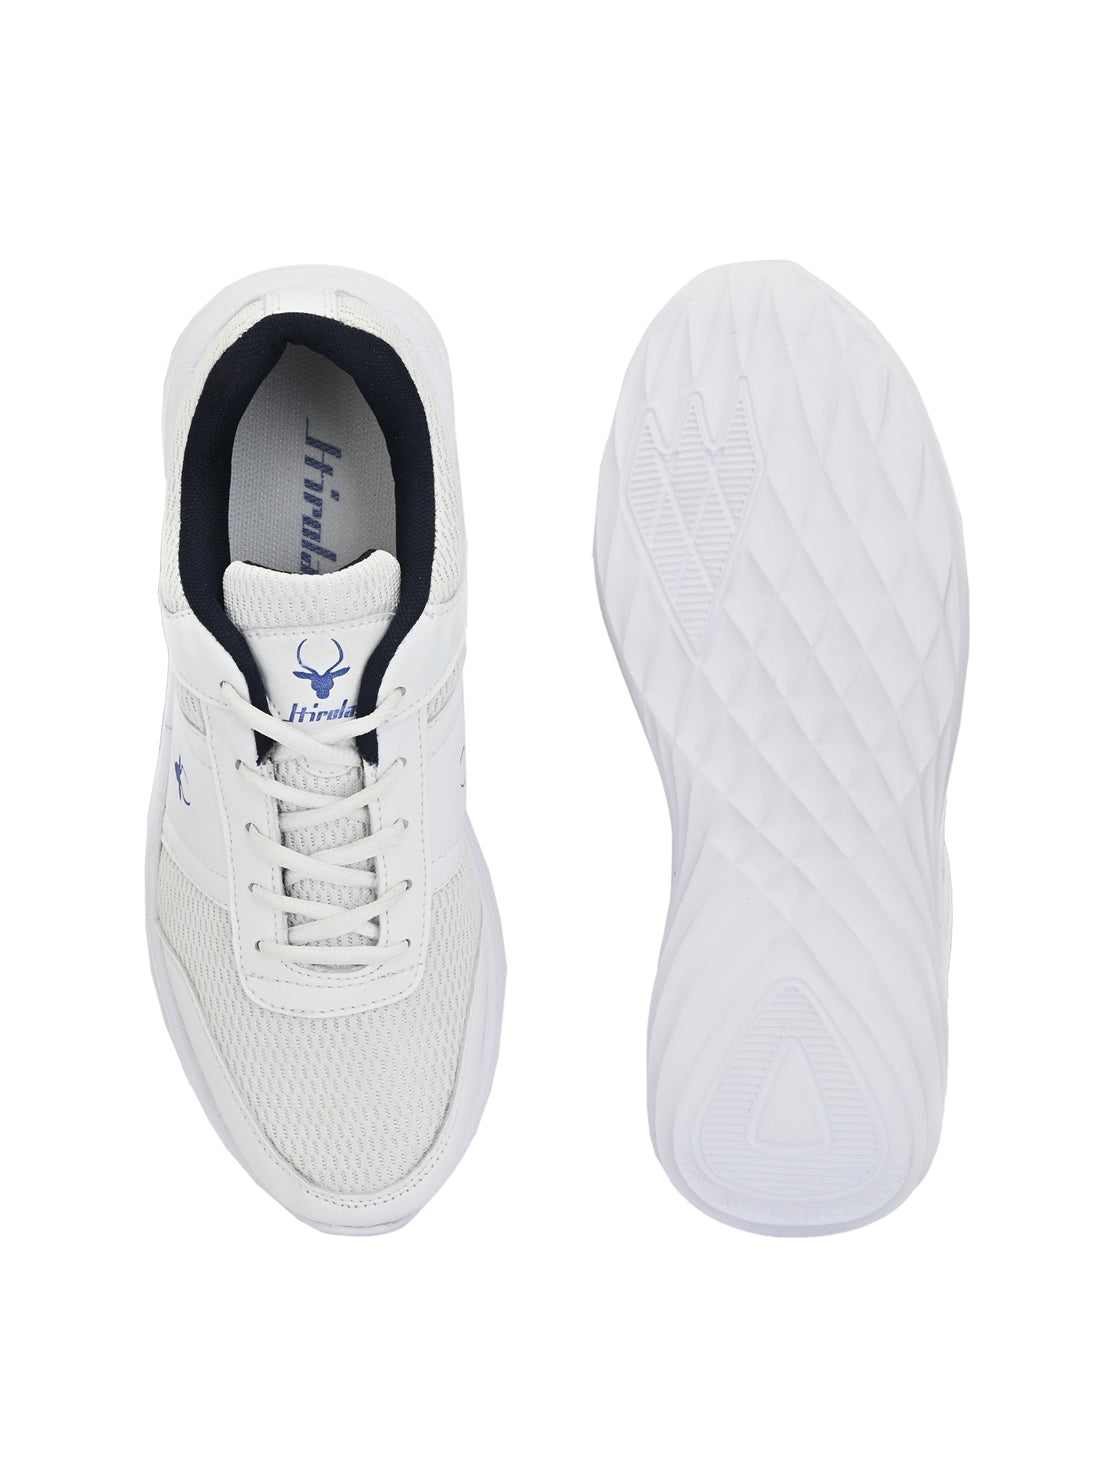 Hirolas® Men's White Synthetic Leather Lace-Up Walking Sport Shoes